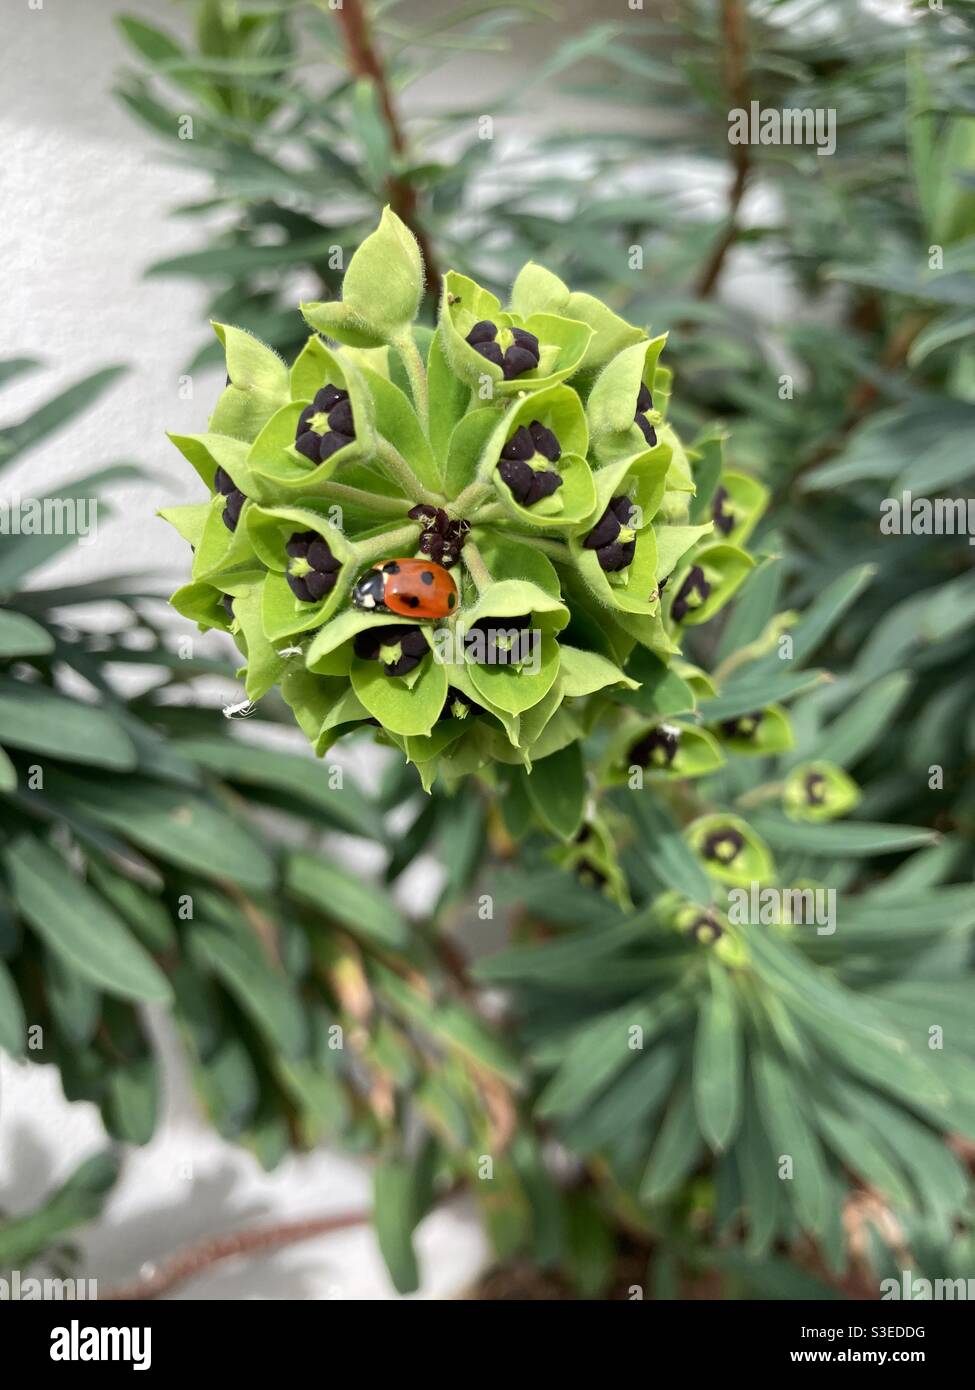 Ladybird perched on an Albanian spurge plant Stock Photo